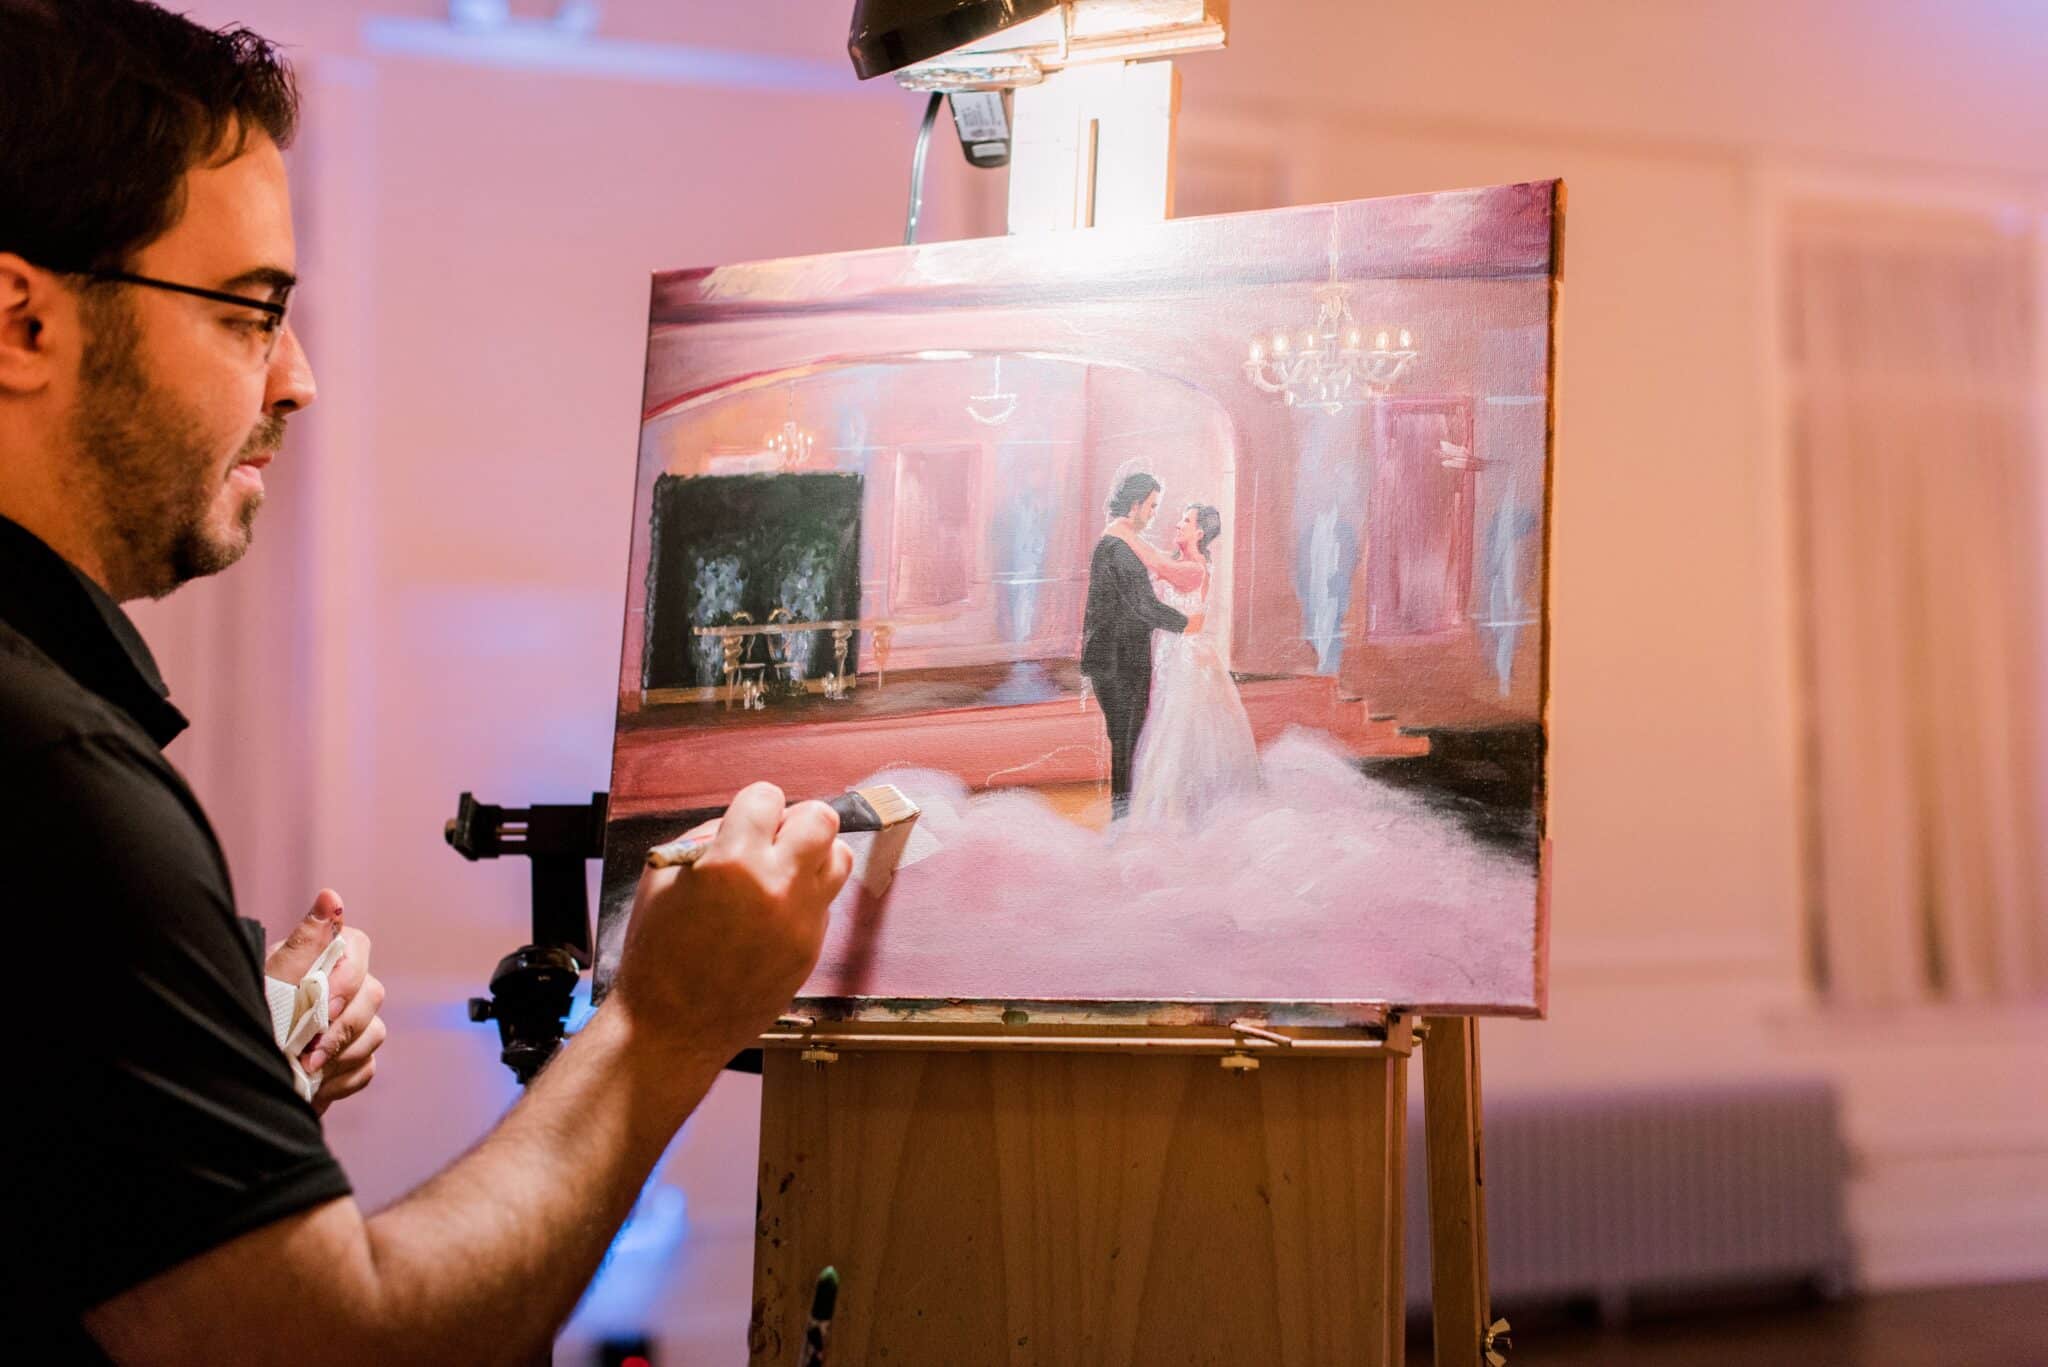 finished live painting from wedding with bride and groom in the painting dancing at reception surrounded by fog machine smoke